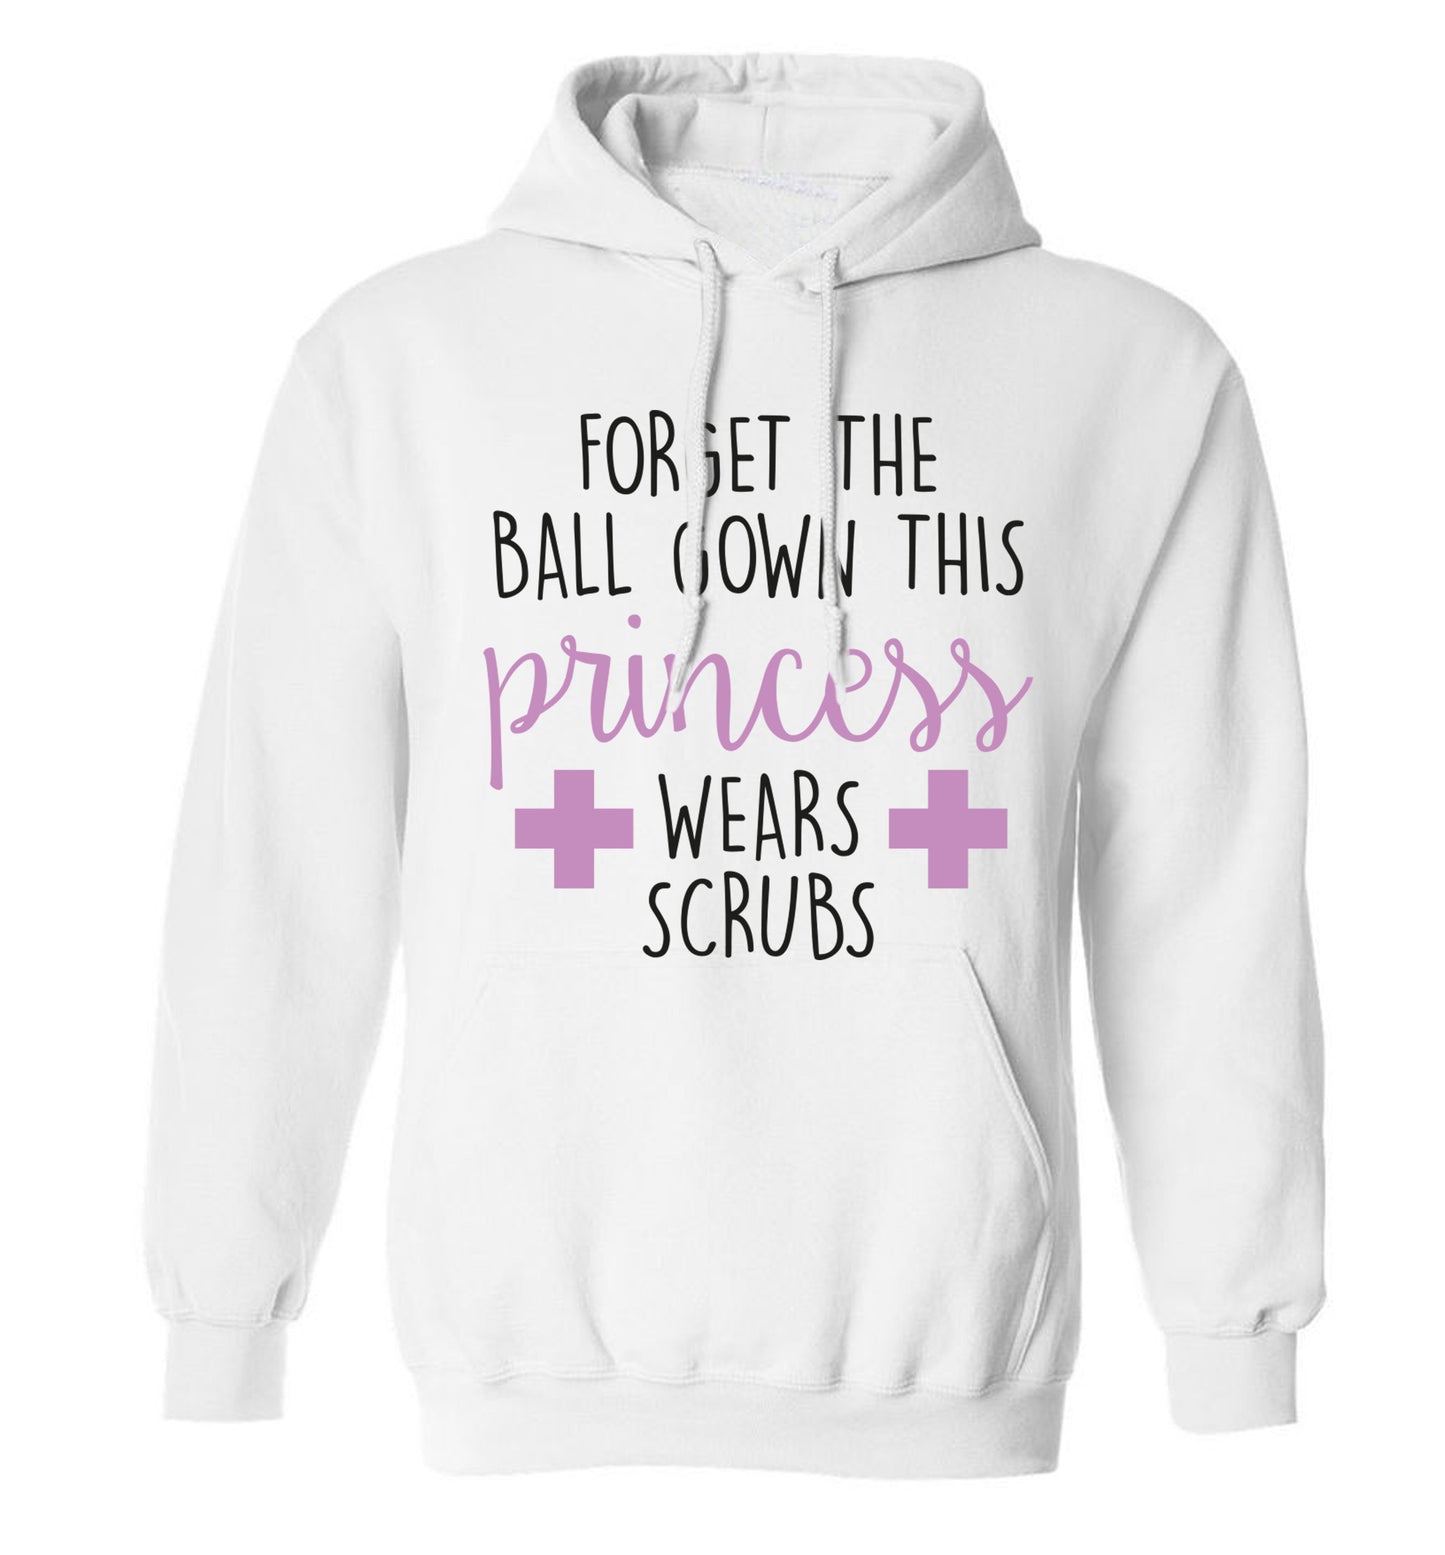 Forget the ball gown this princess wears scrubs adults unisex white hoodie 2XL